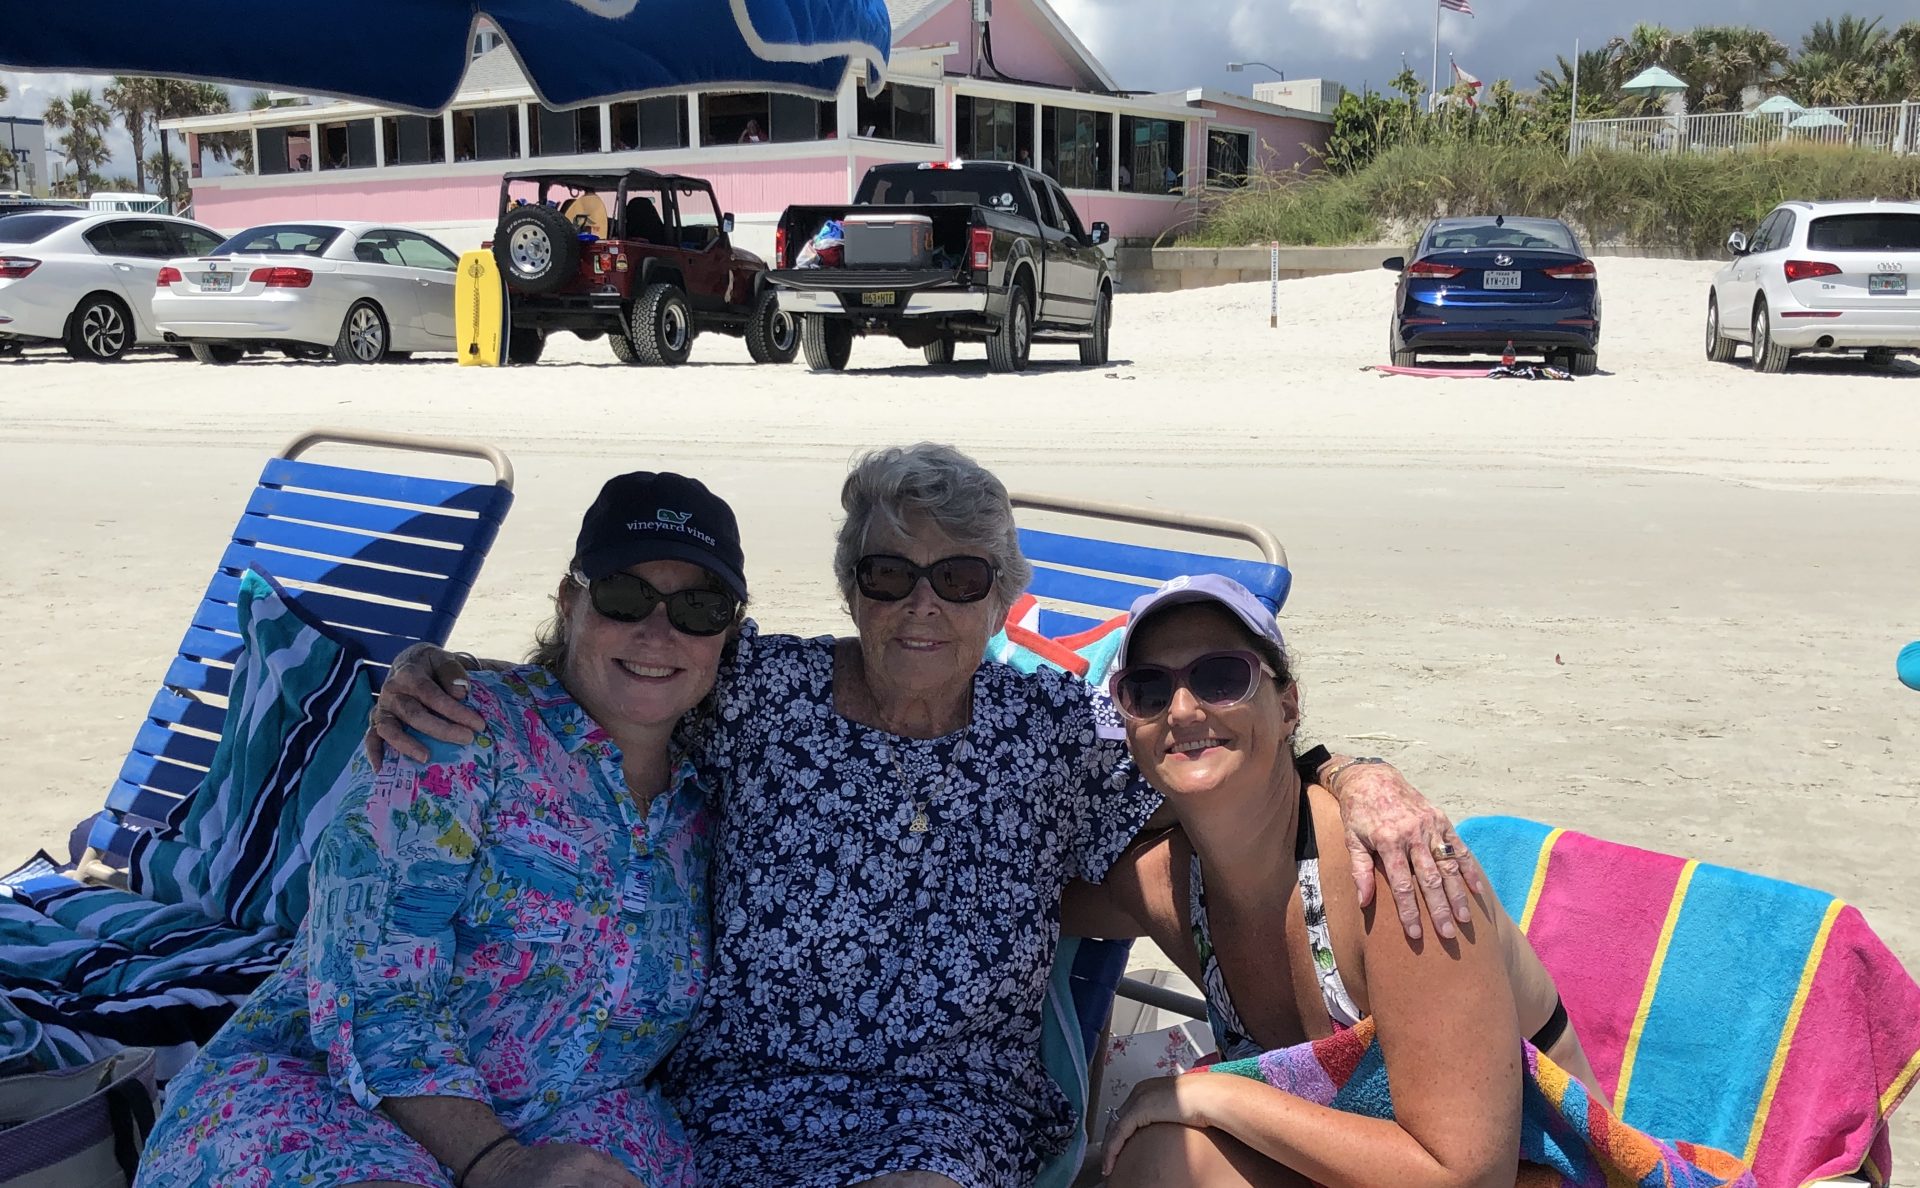 Mom was thrilled to be at the ocean - New Smyrna Beach July 2019